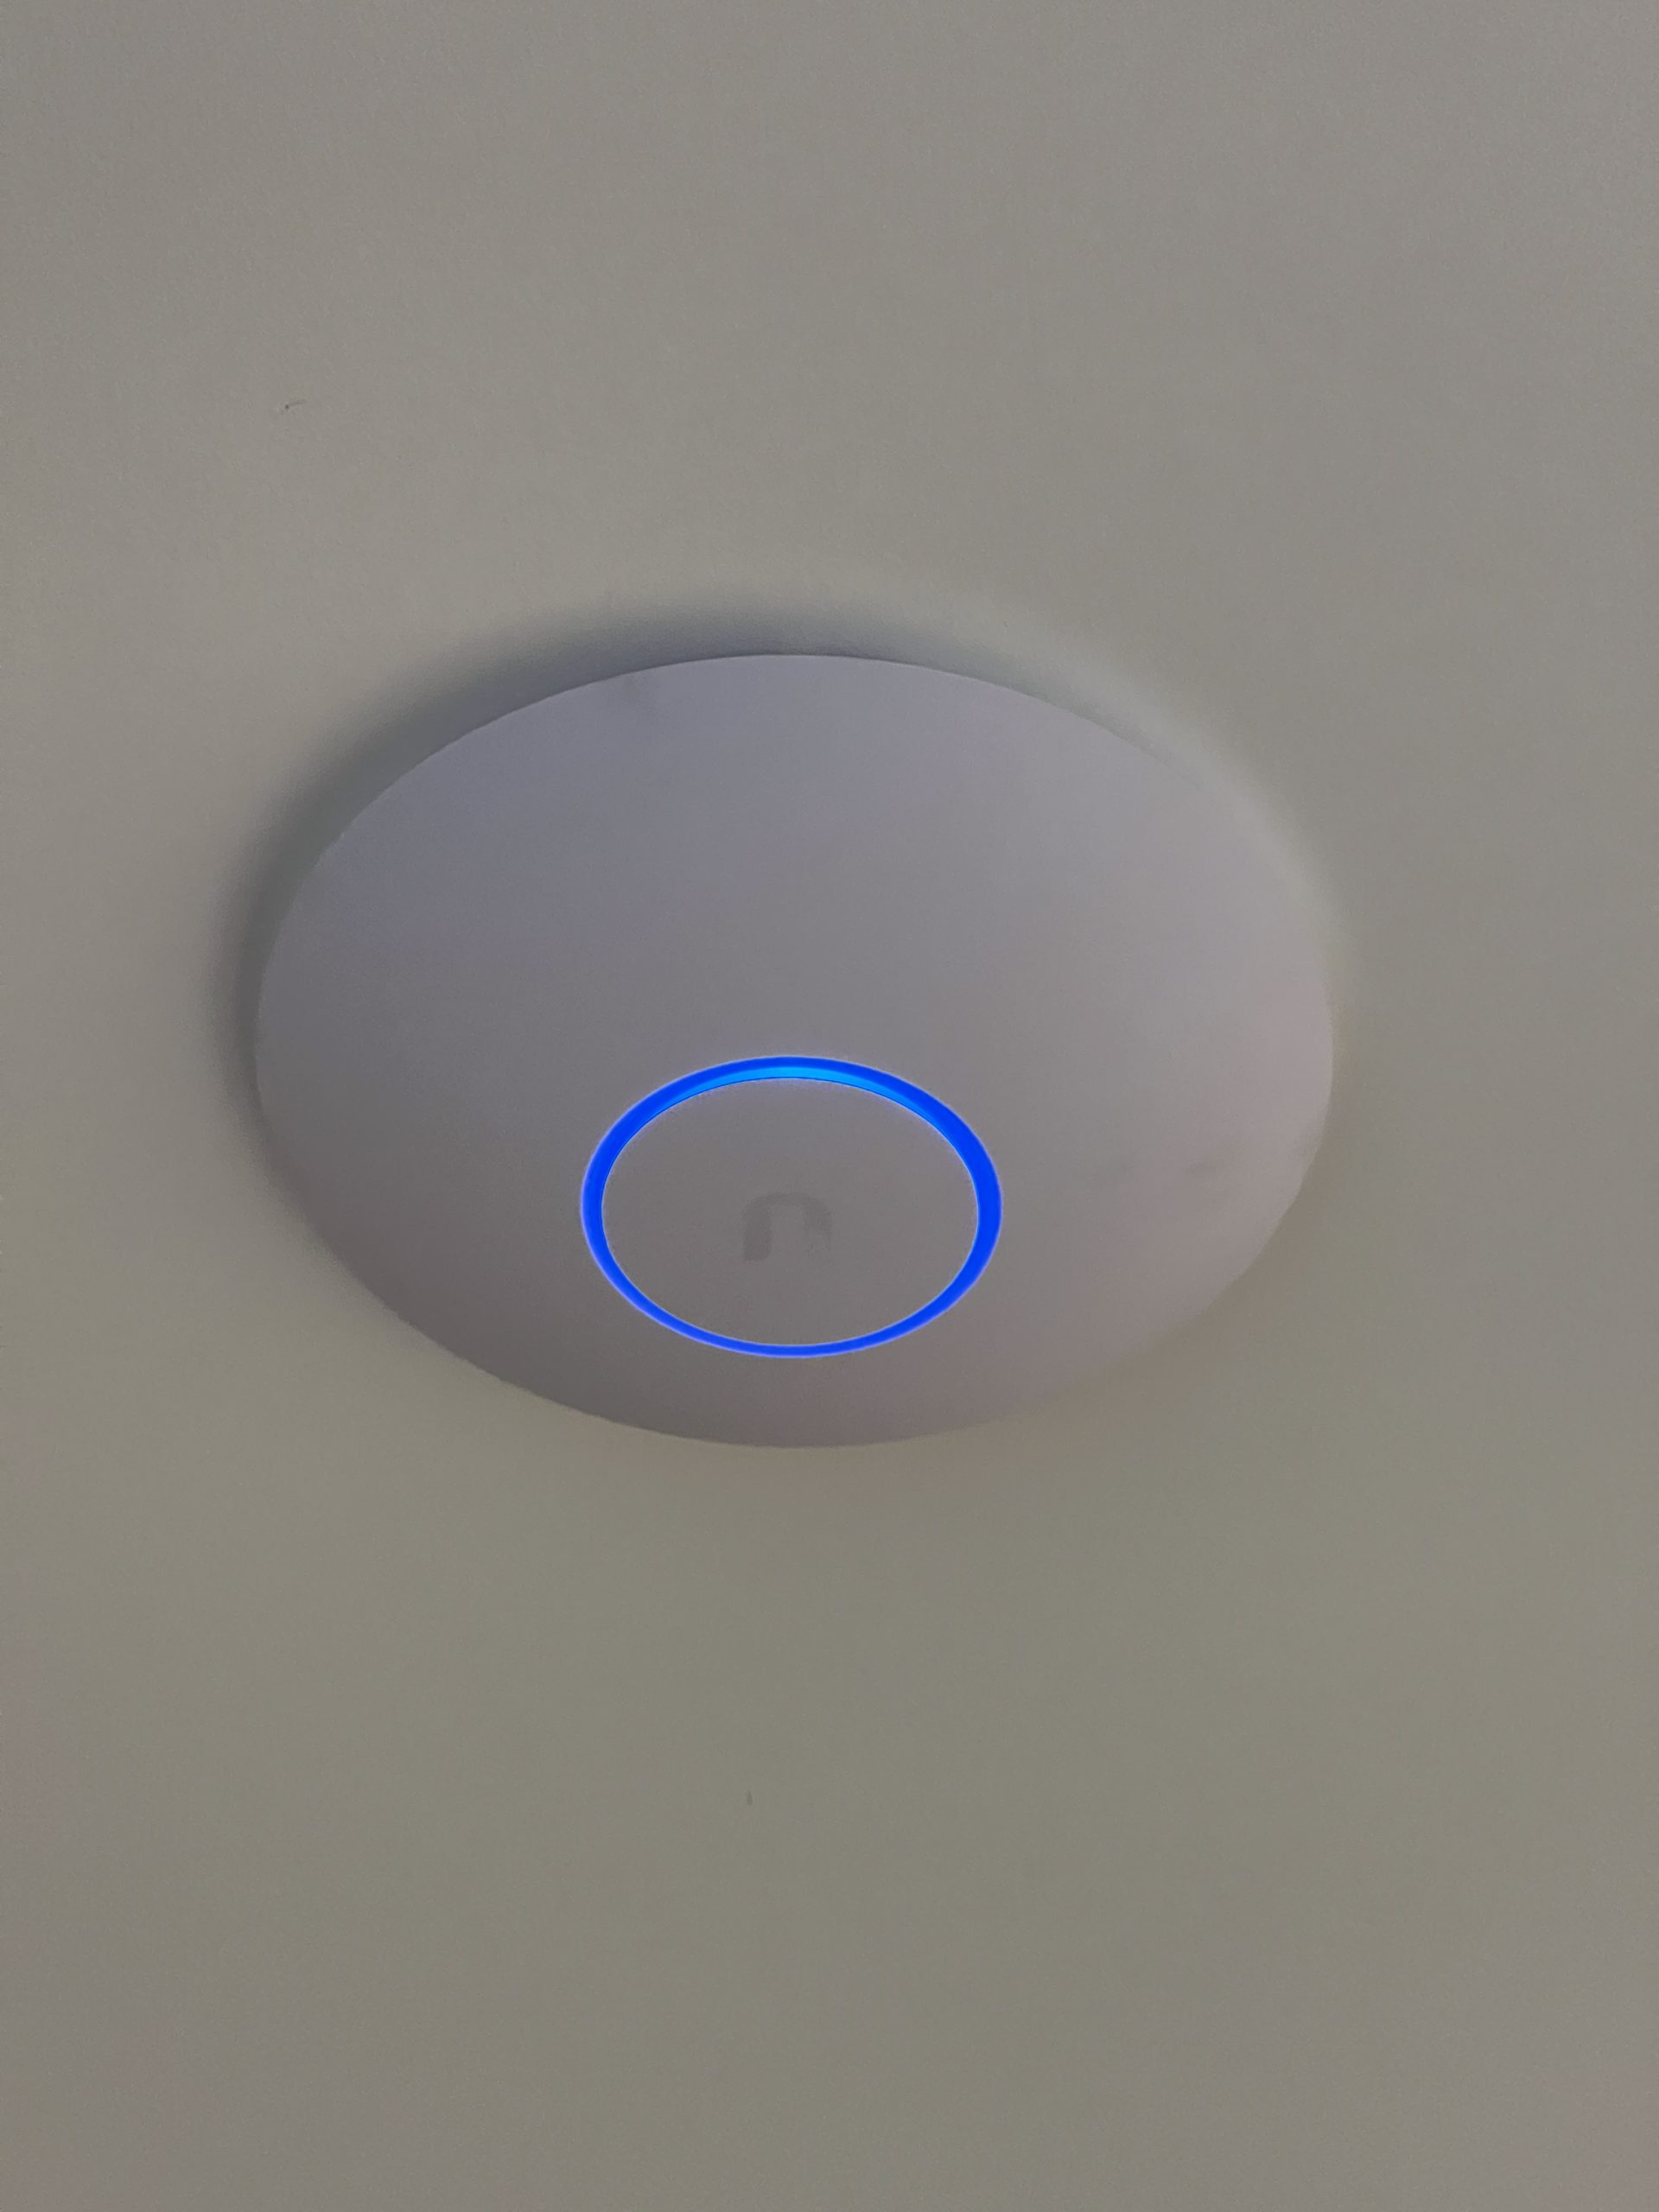 Ubiquiti AC LR Access Point Ceiling Mounted